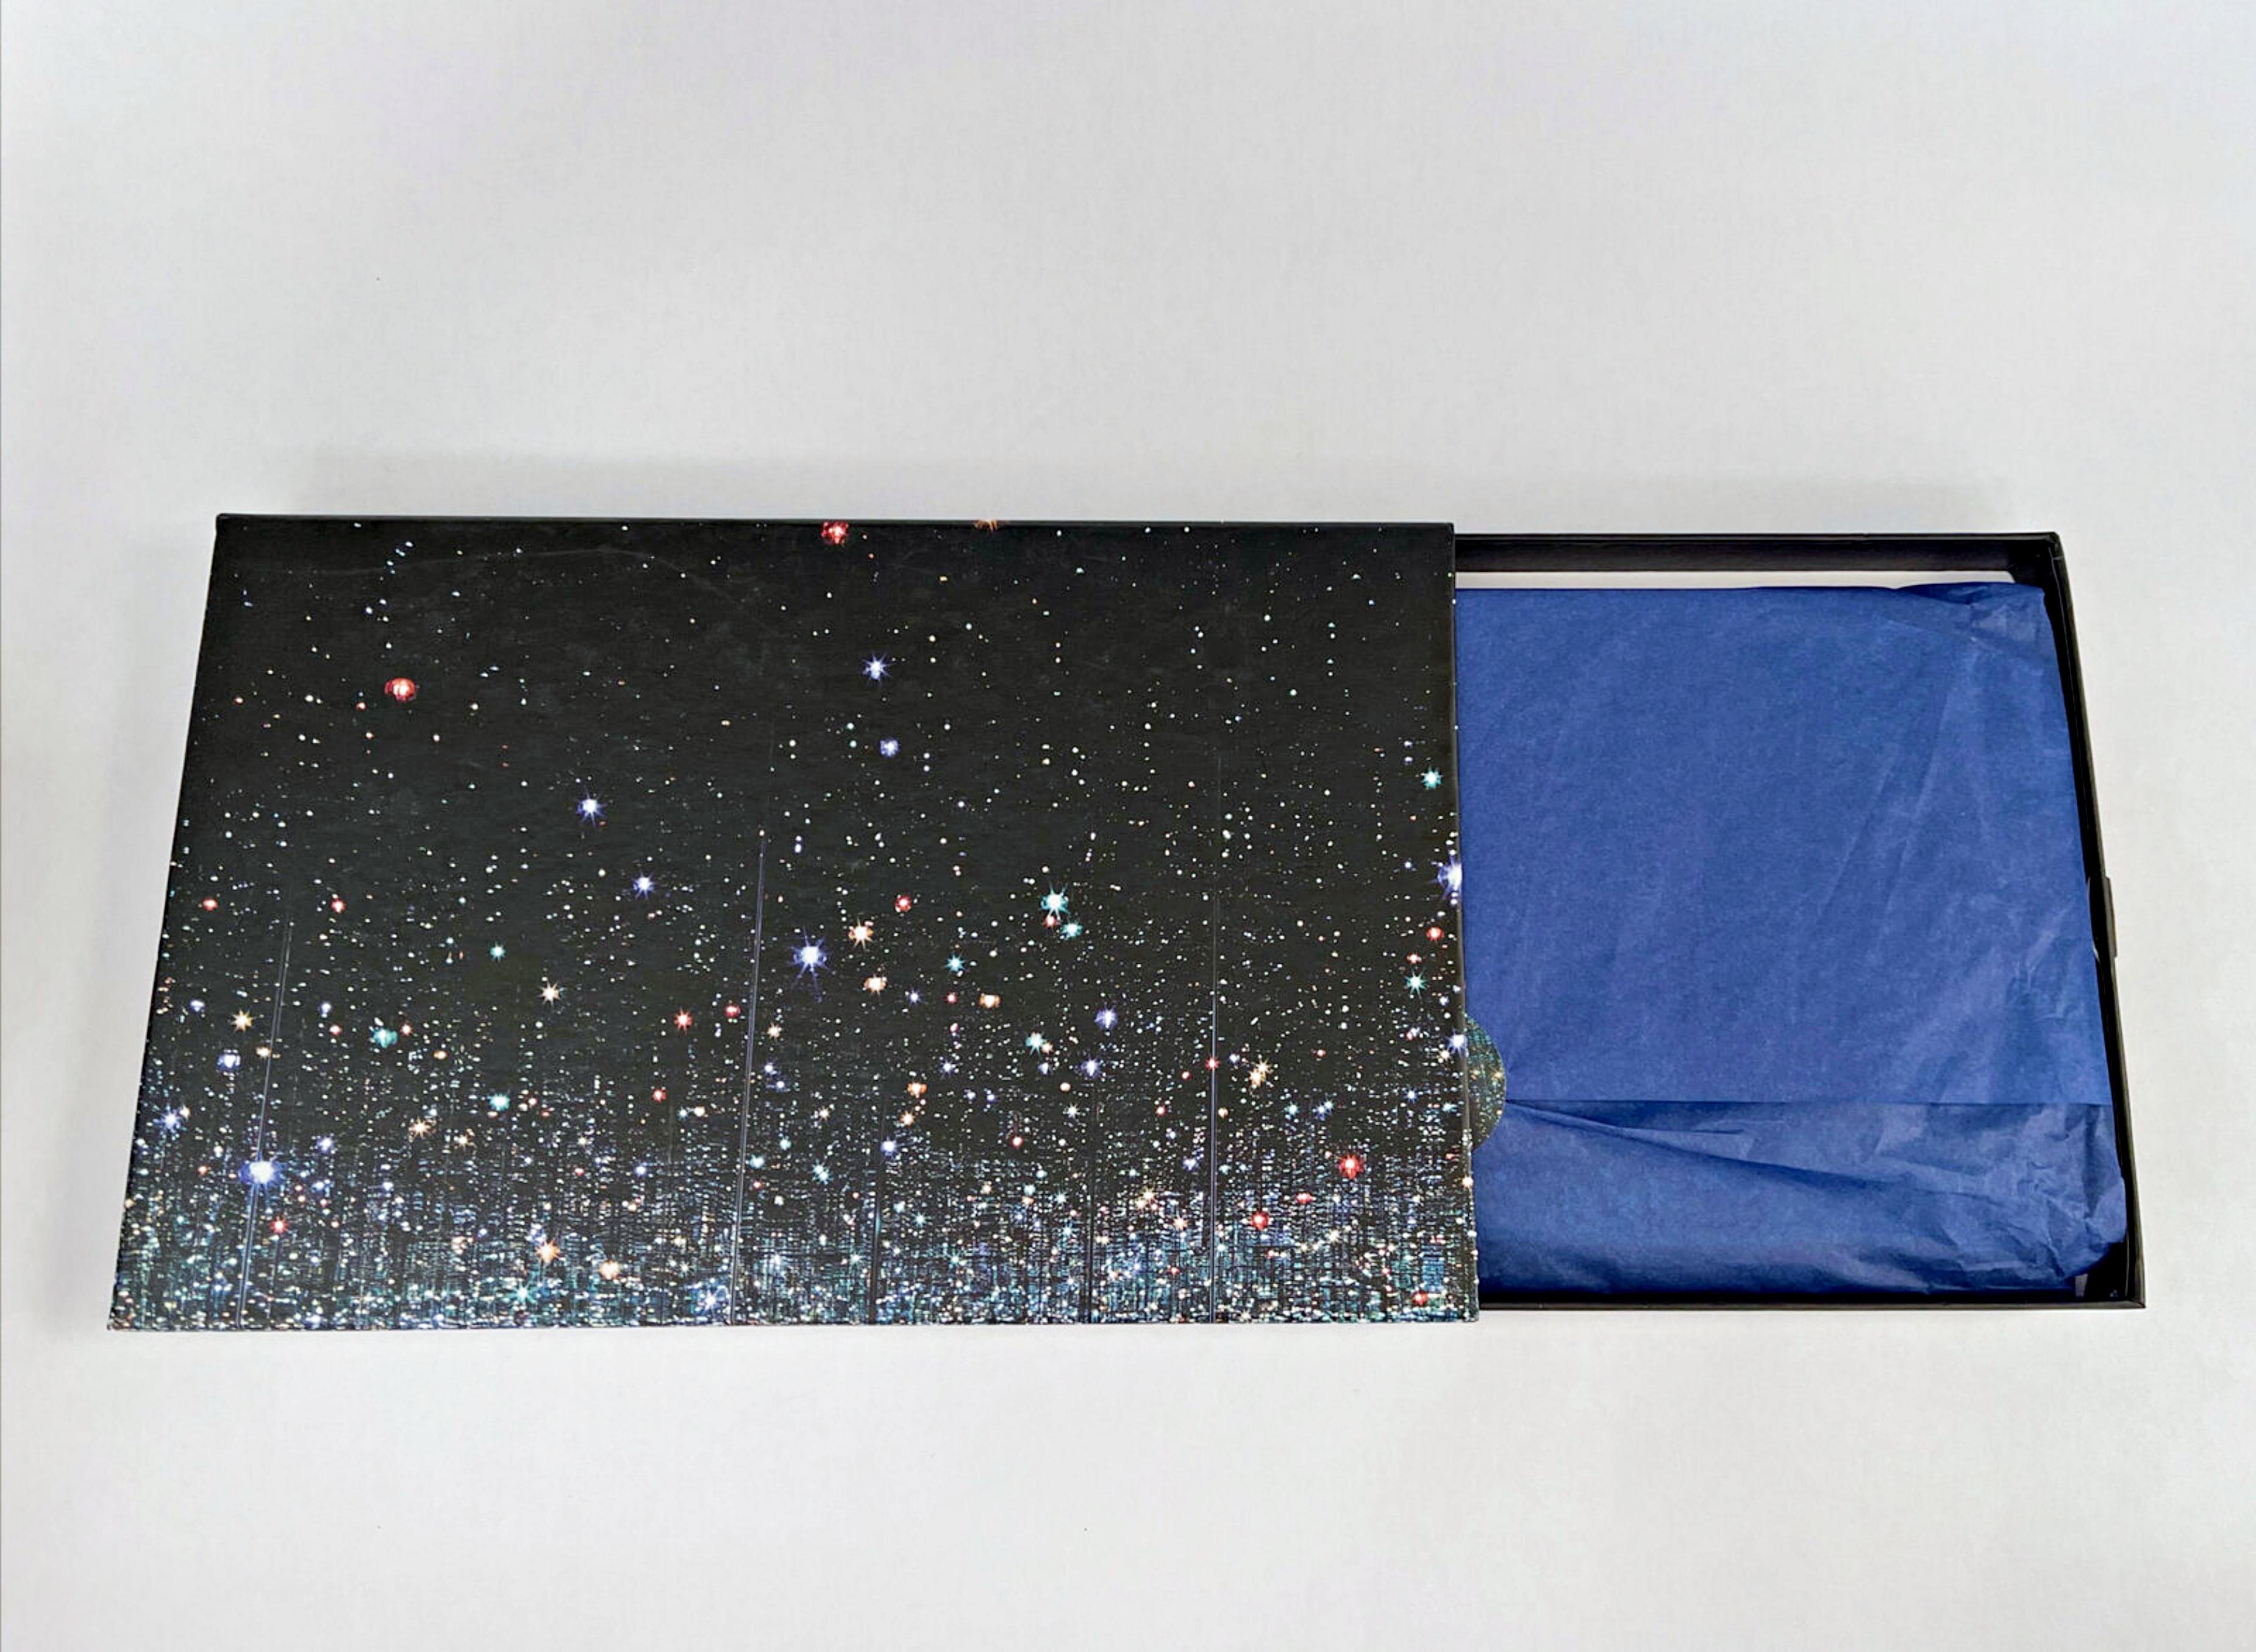 Infinity Mirrored Room: The Souls of Millions of Light Years Away Leather Clutch 2